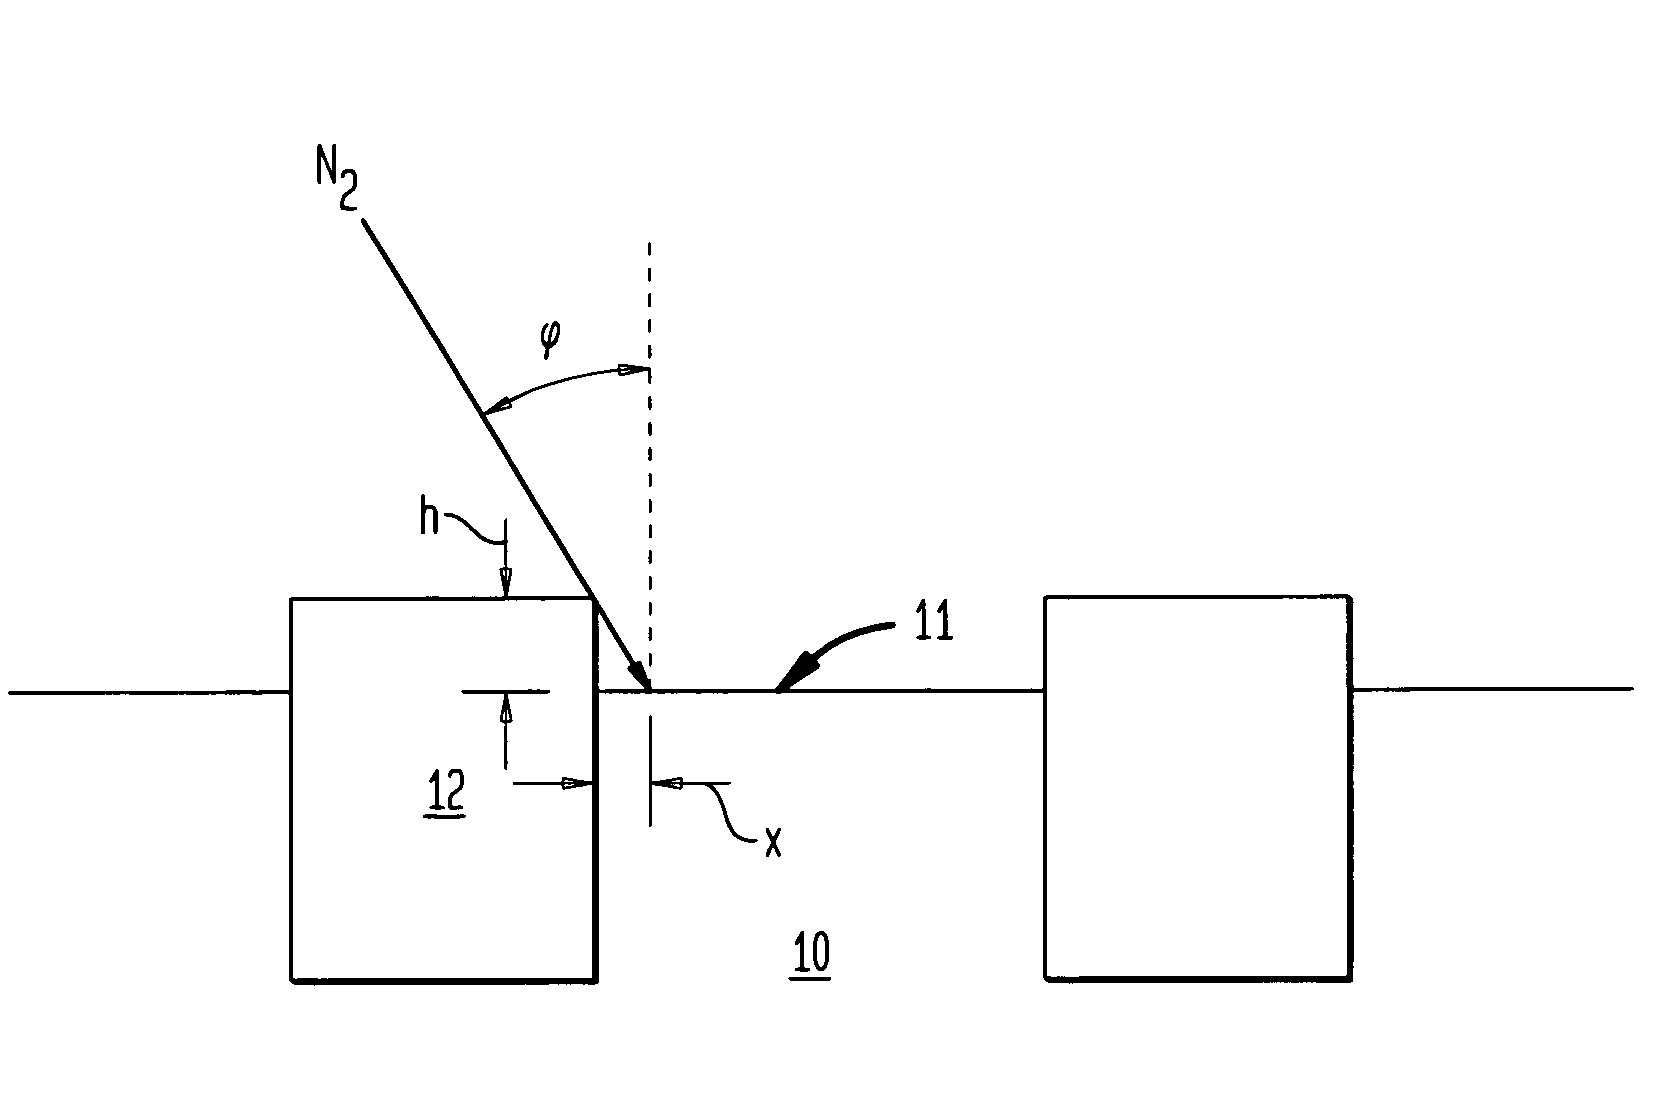 Nitrogen implantation using a shadow effect to control gate oxide thickness in DRAM semiconductor